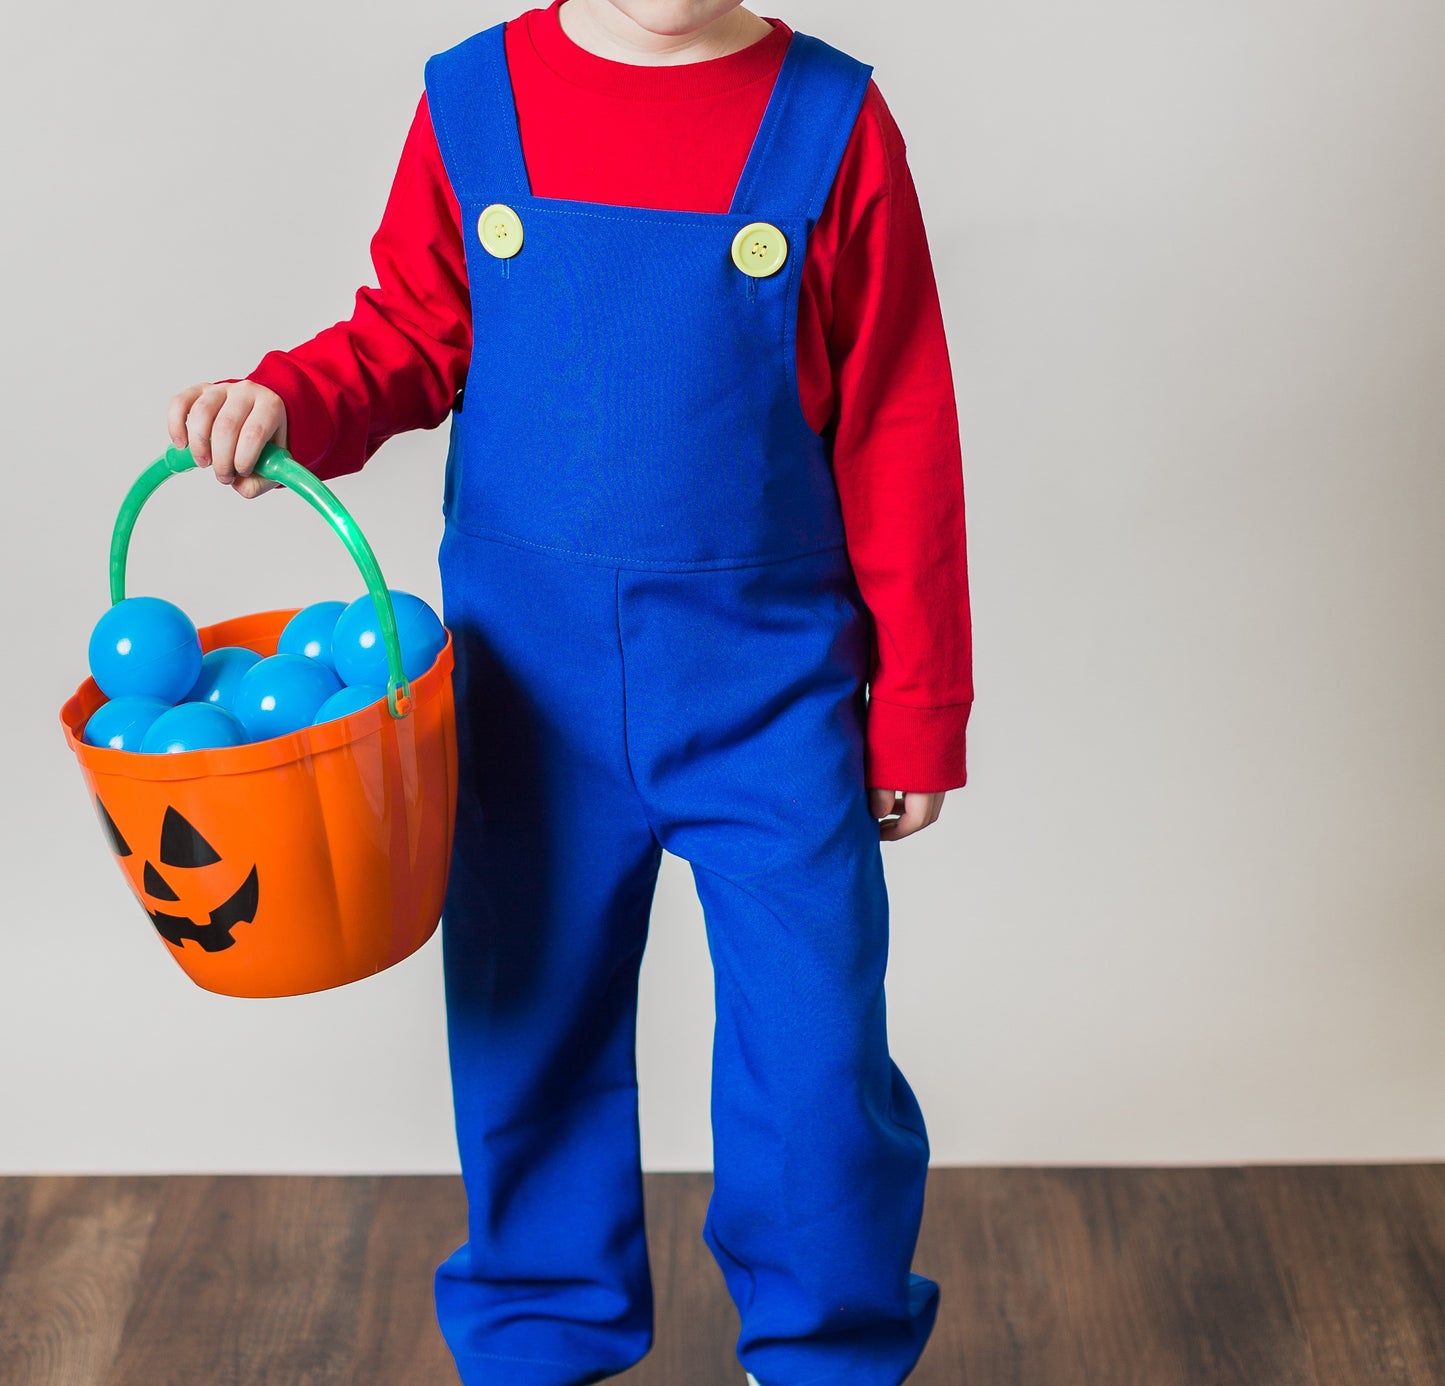 Super Mario Bros Costume, Blue Overalls ONLY, Party Outfit For